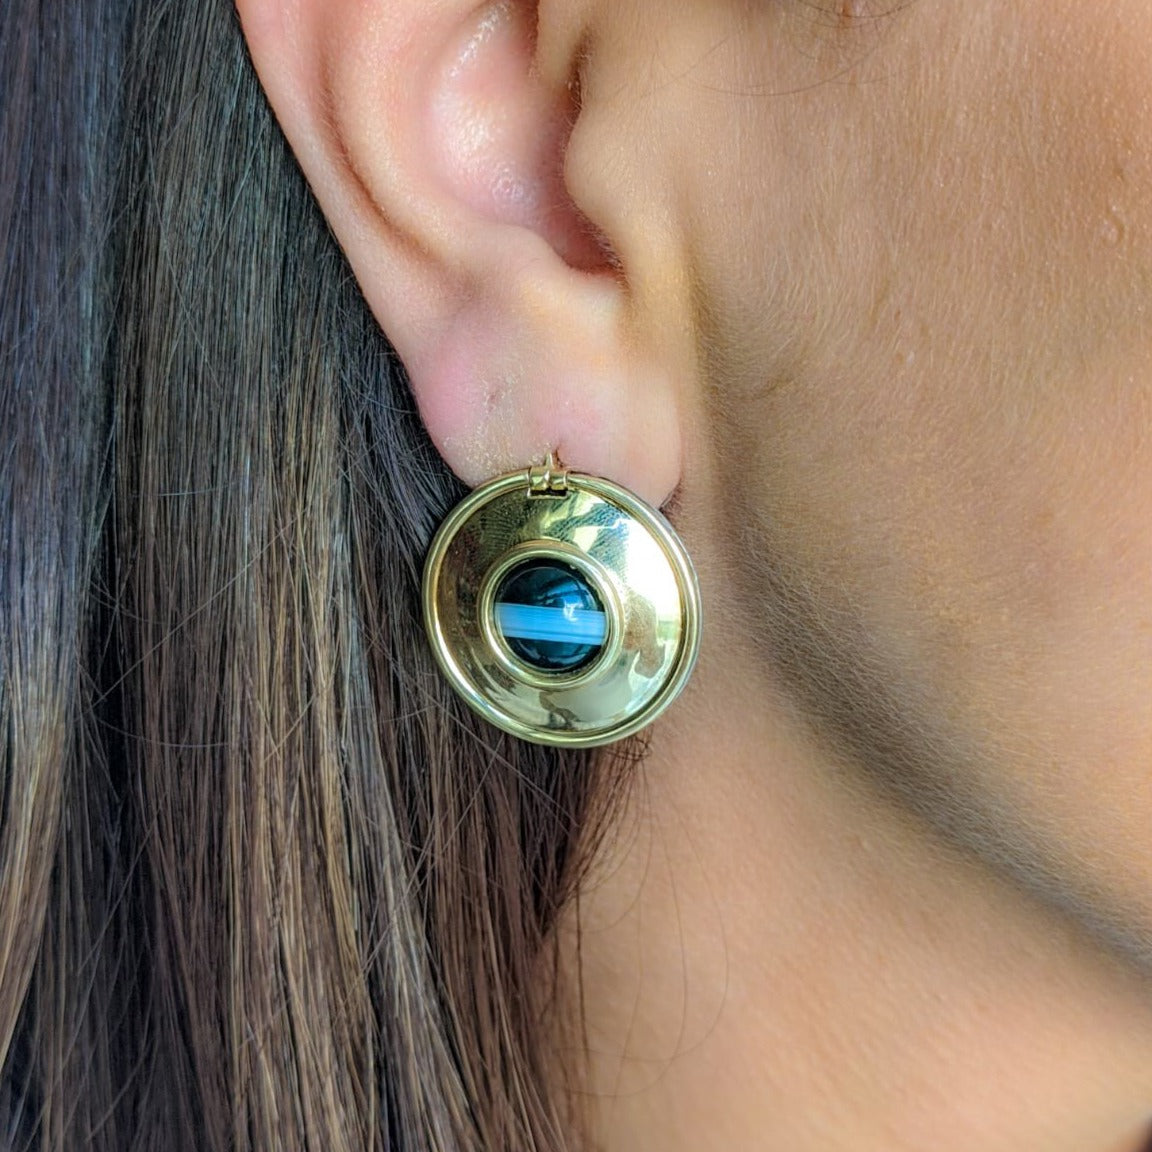 Reversible Paloma Picasso earrings worn on the gold side on a woman’s ear.